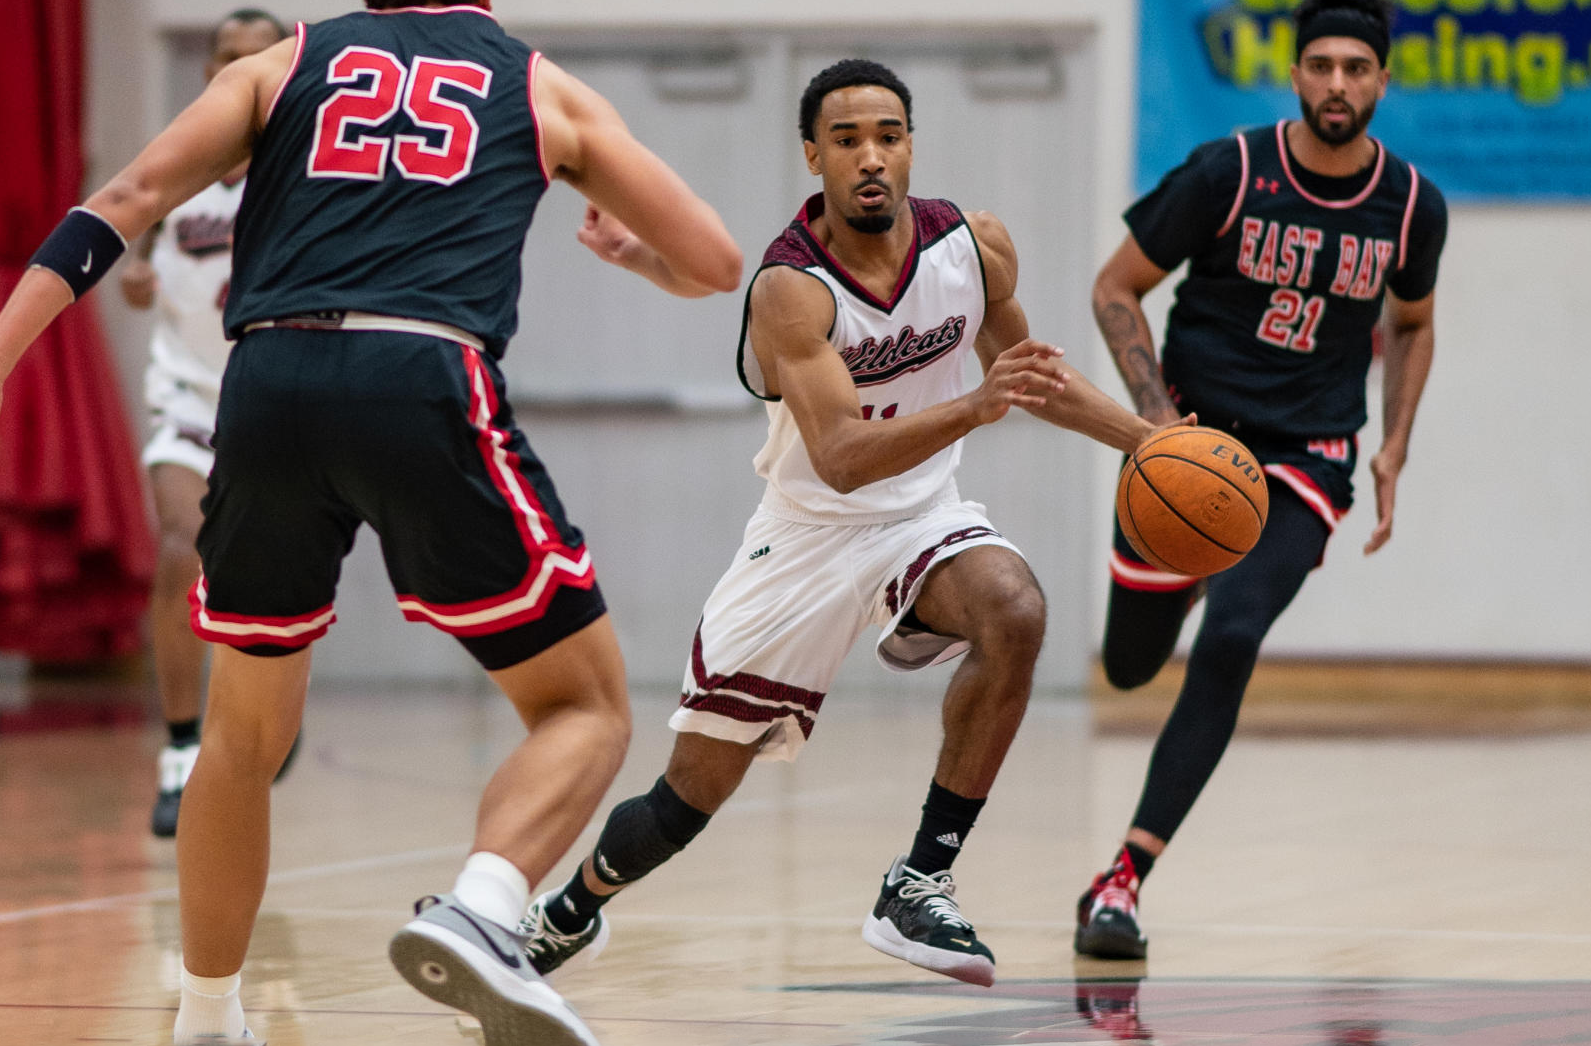 Kevin Warren dribbles between two members of the Cal State East Bay team.